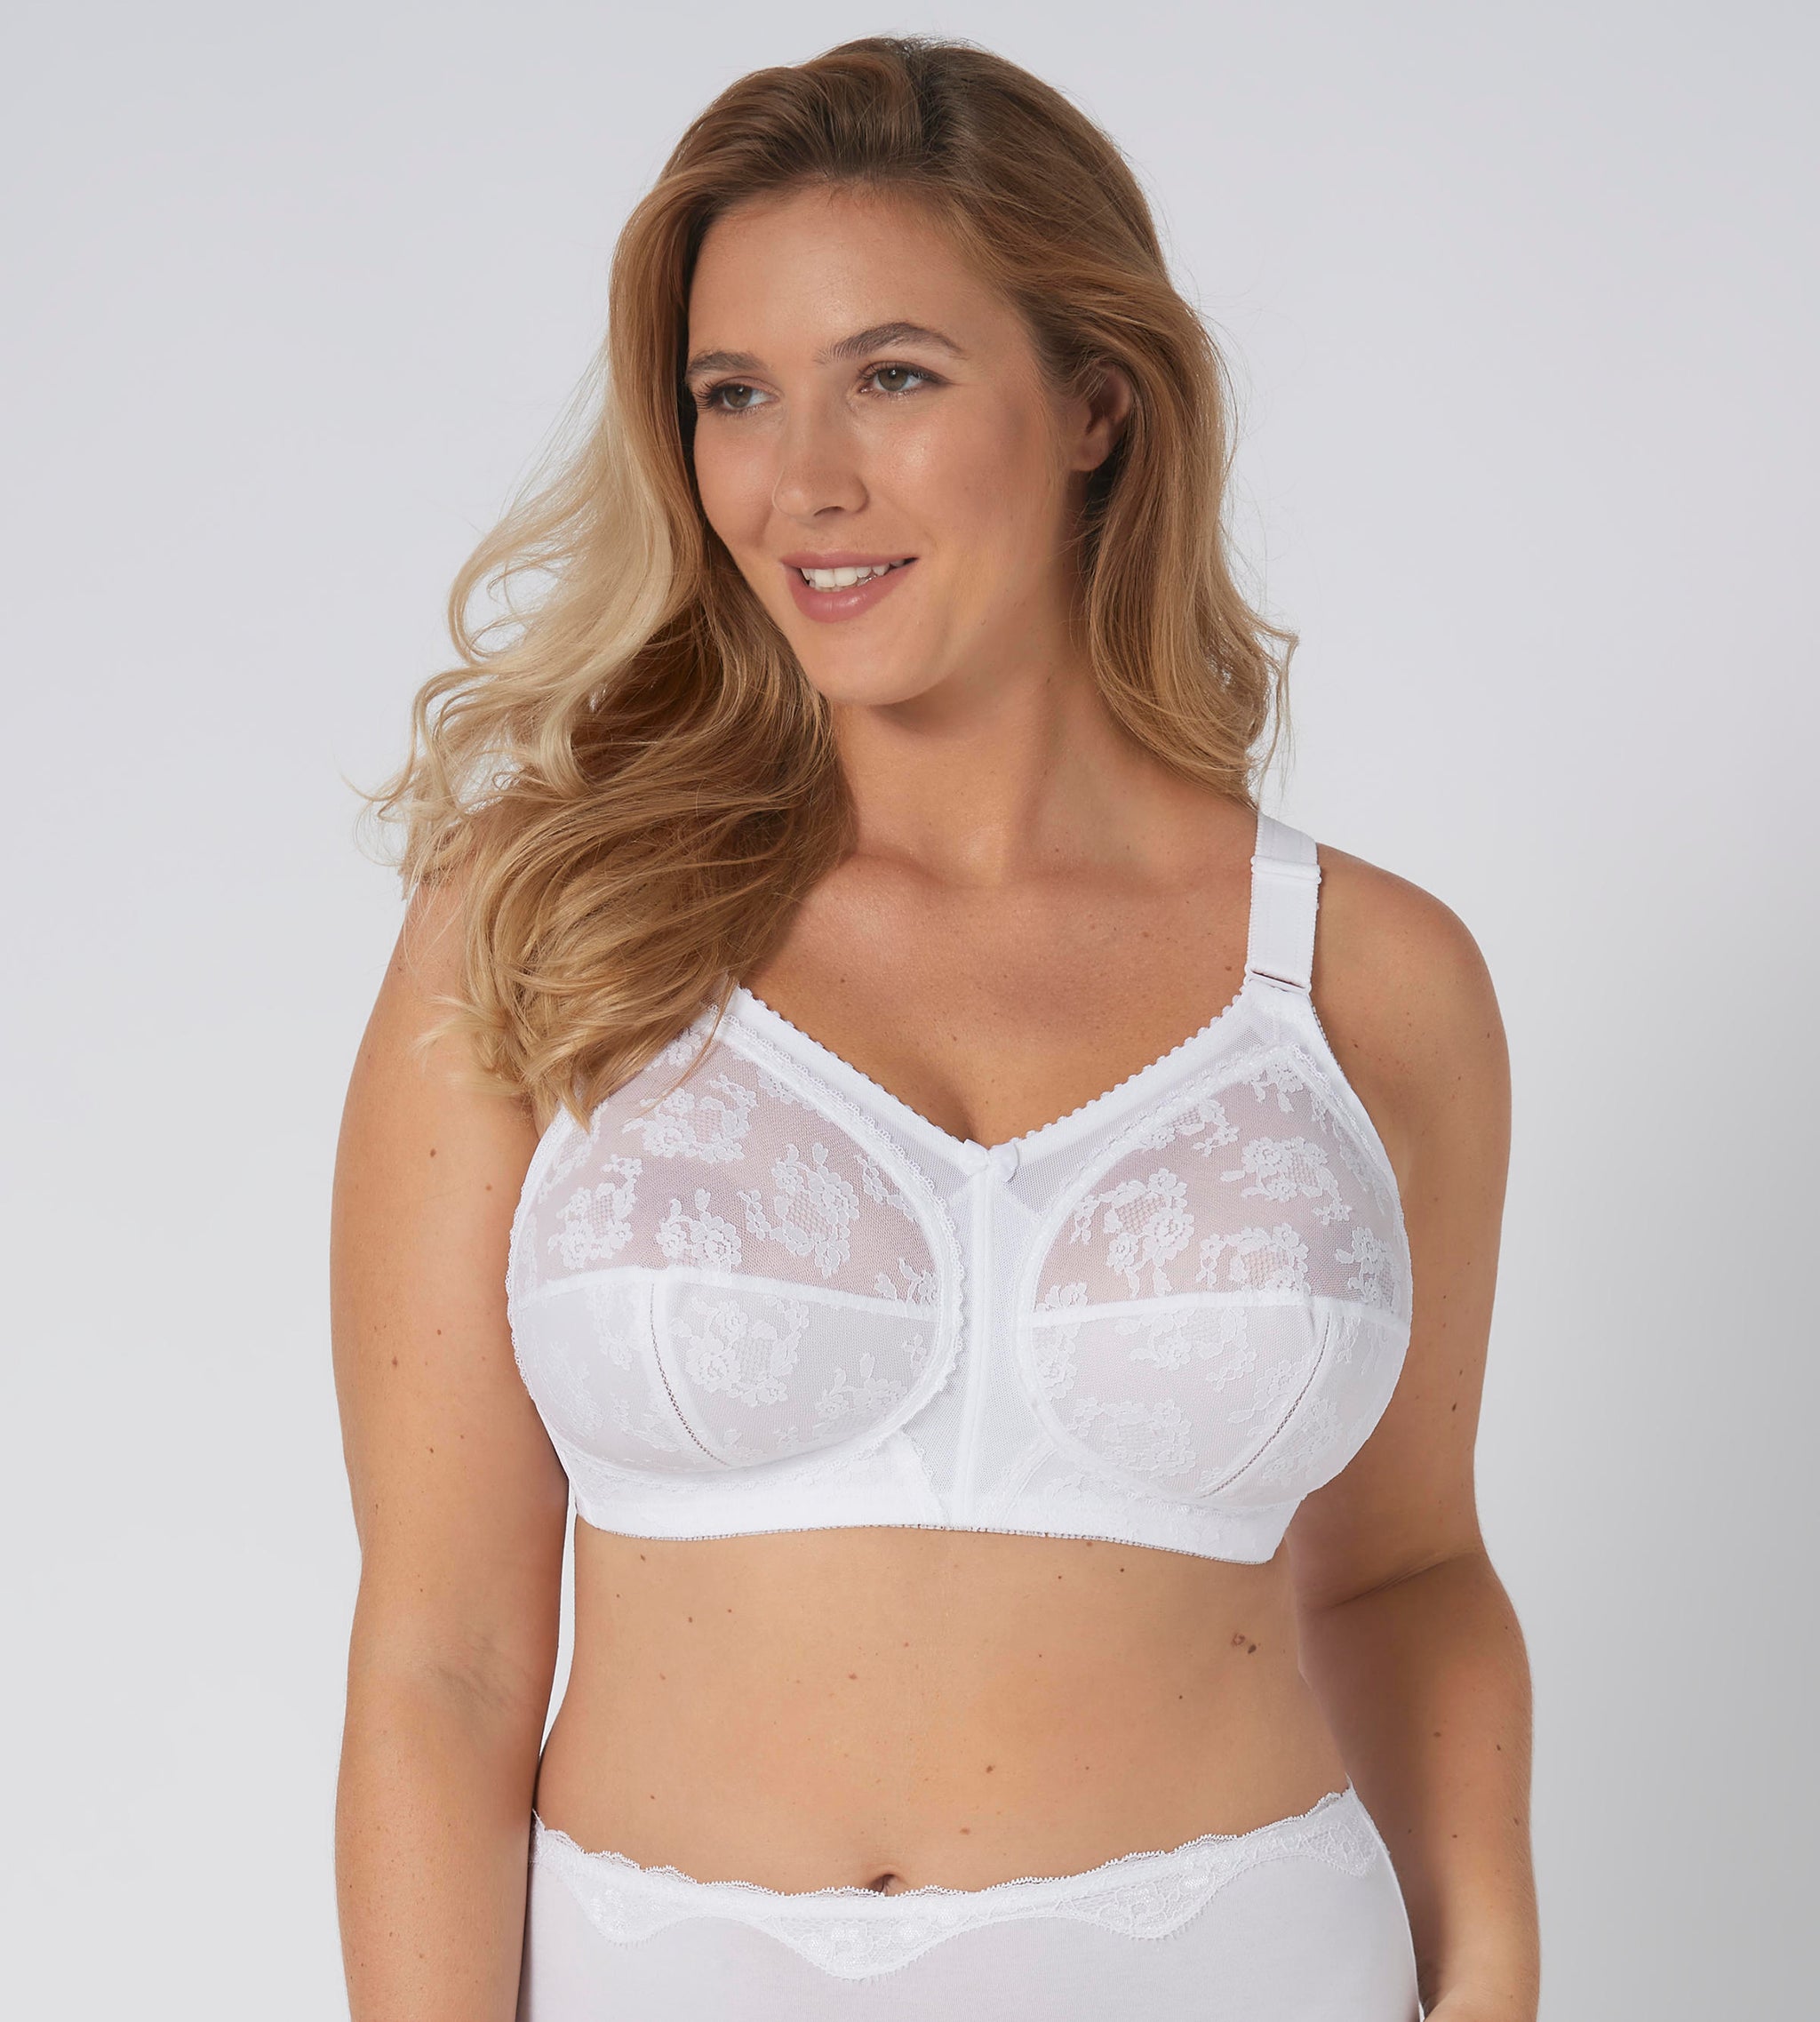 Triumph Lingerie bra review - What Would Karl Do